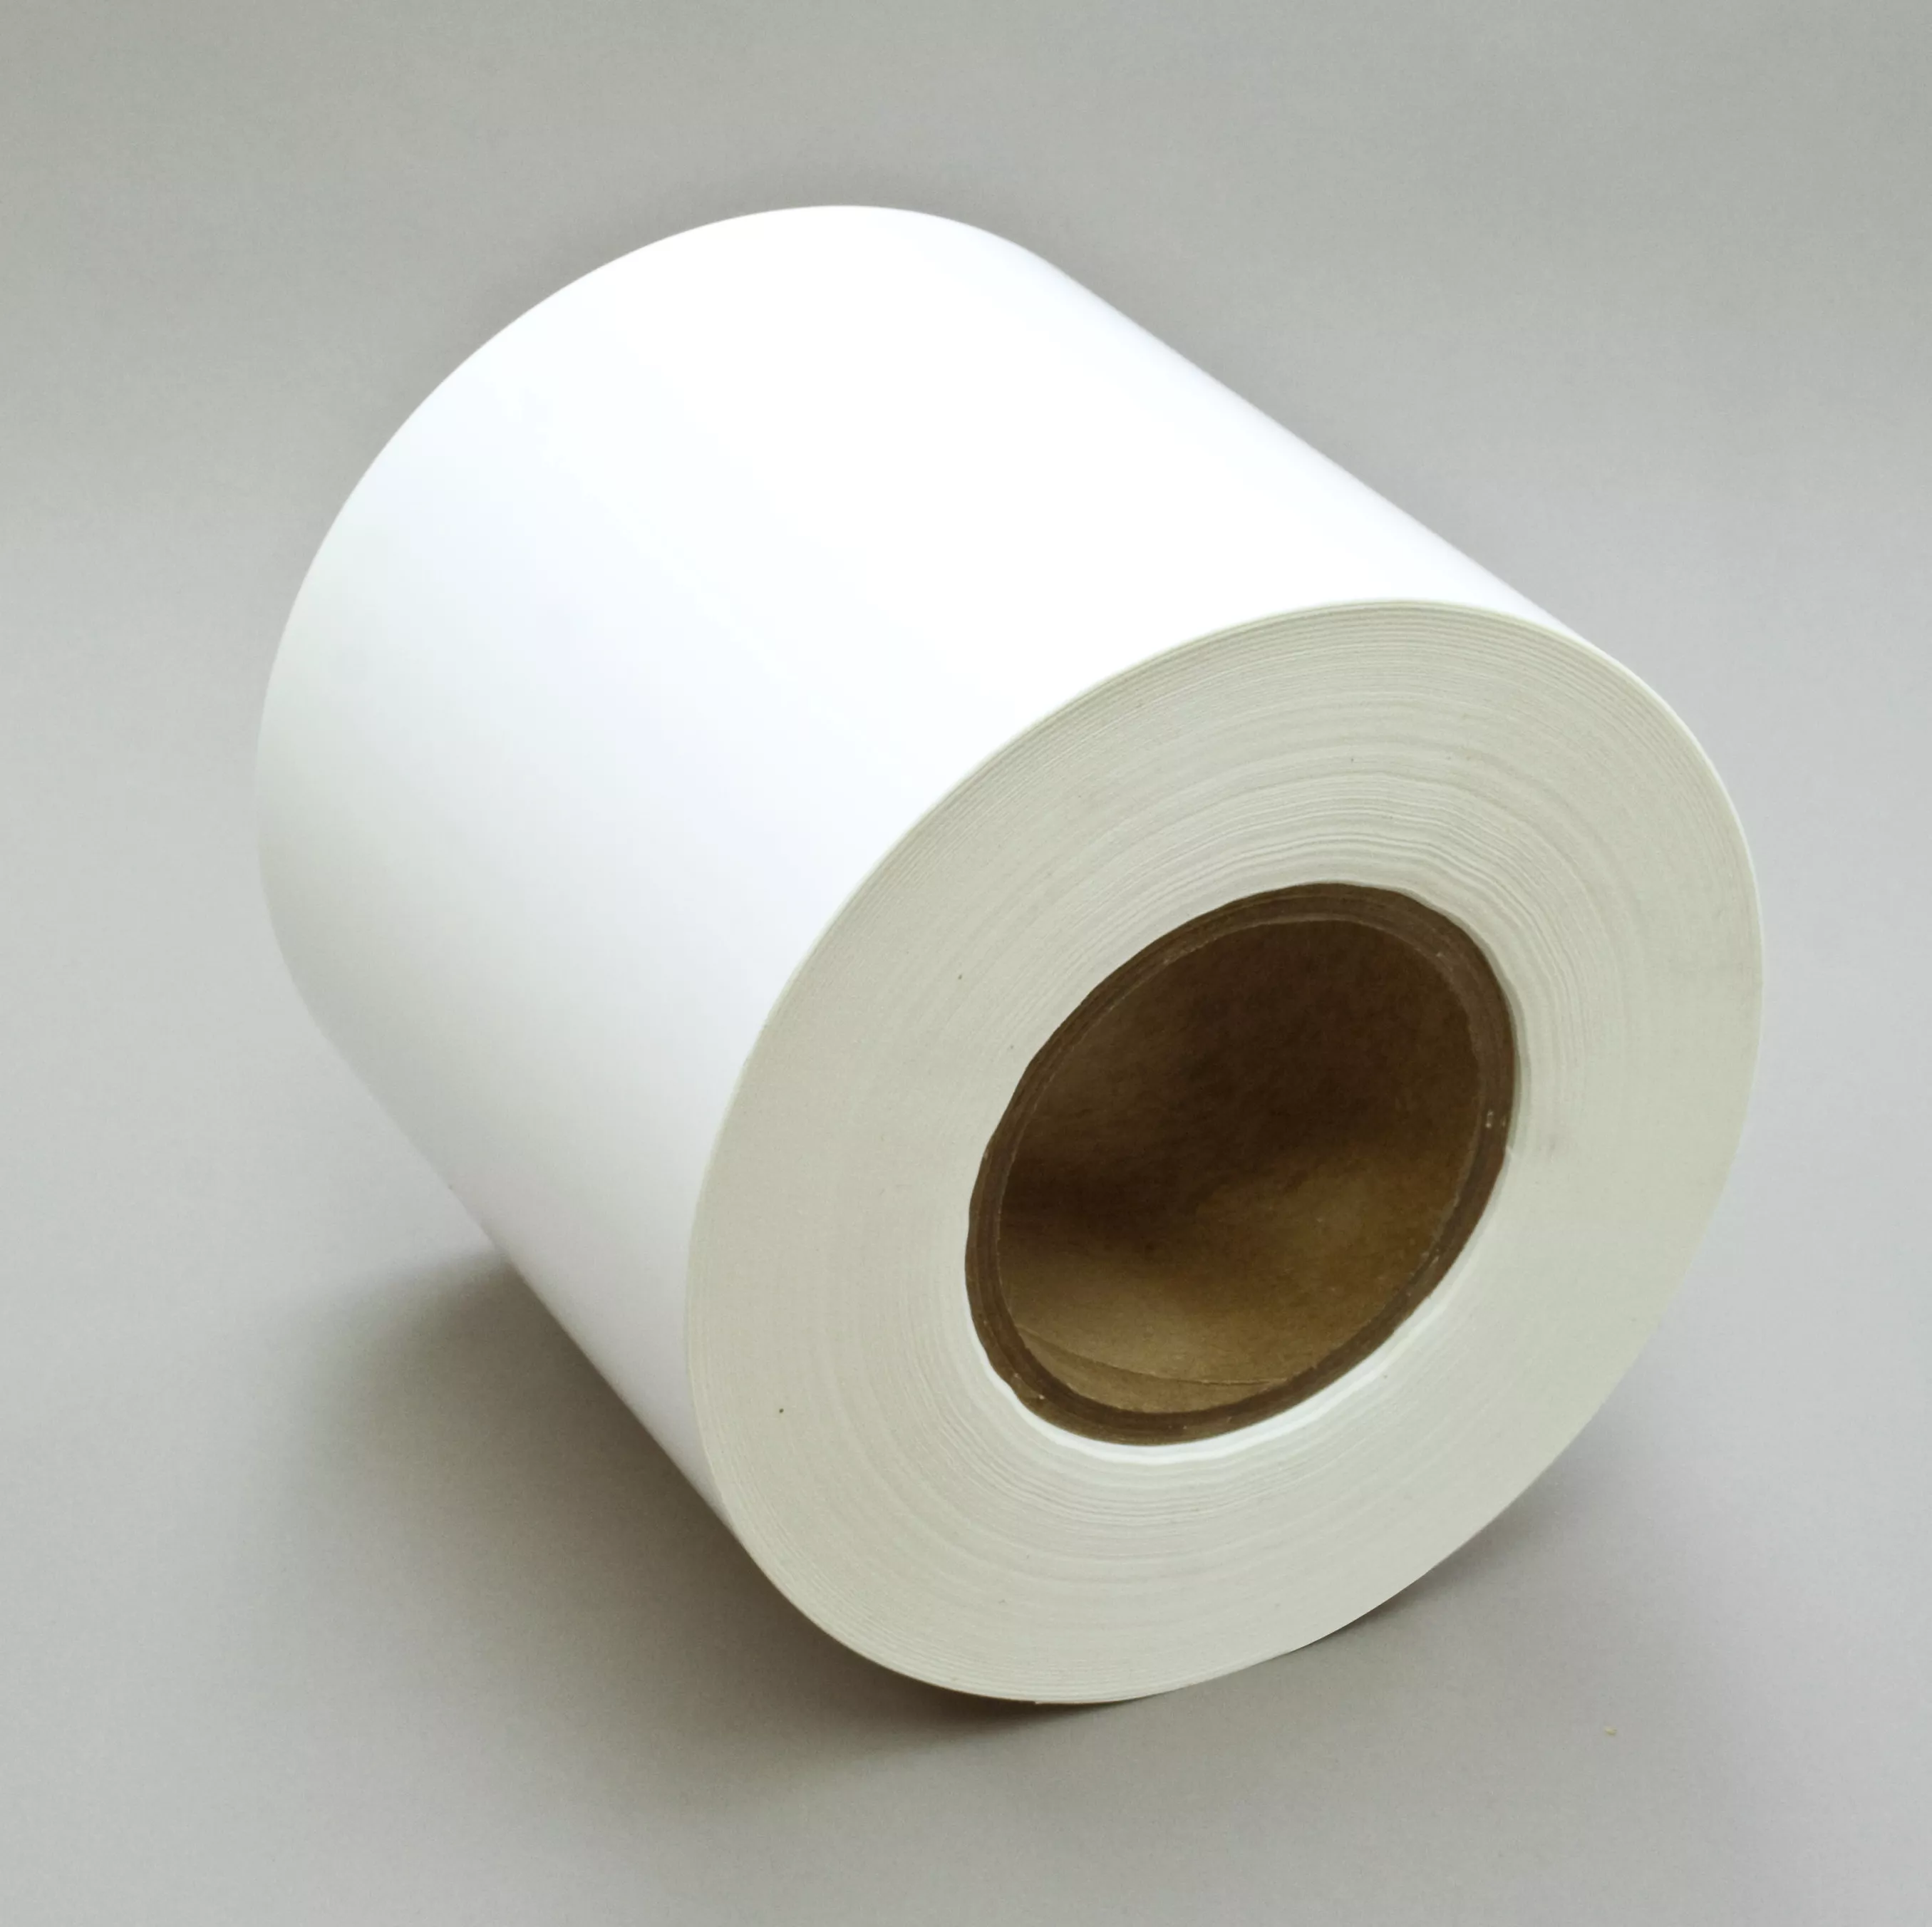 3M™ Dot Matrix Label Material 7811, Matte White Polyimide, 6 in x 500
ft, 1 Roll/Case